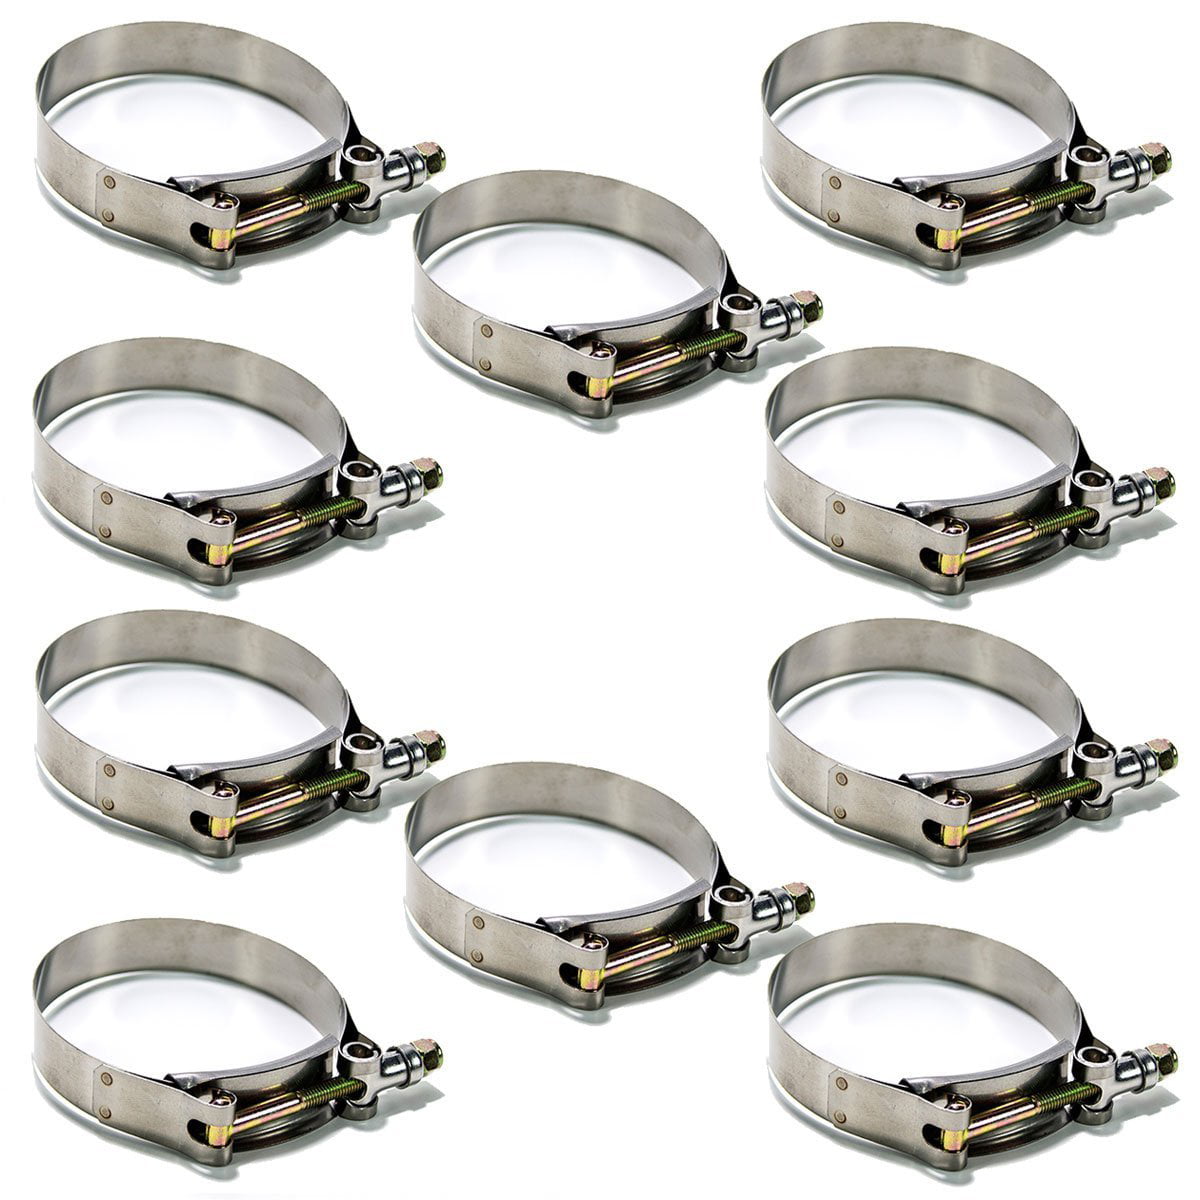 4 Pack 3.5 Heavy Duty Stainless Steel T-Bolt Clamp for 3 1/2 inch Turbo Intake Intercooler Hose Piping 